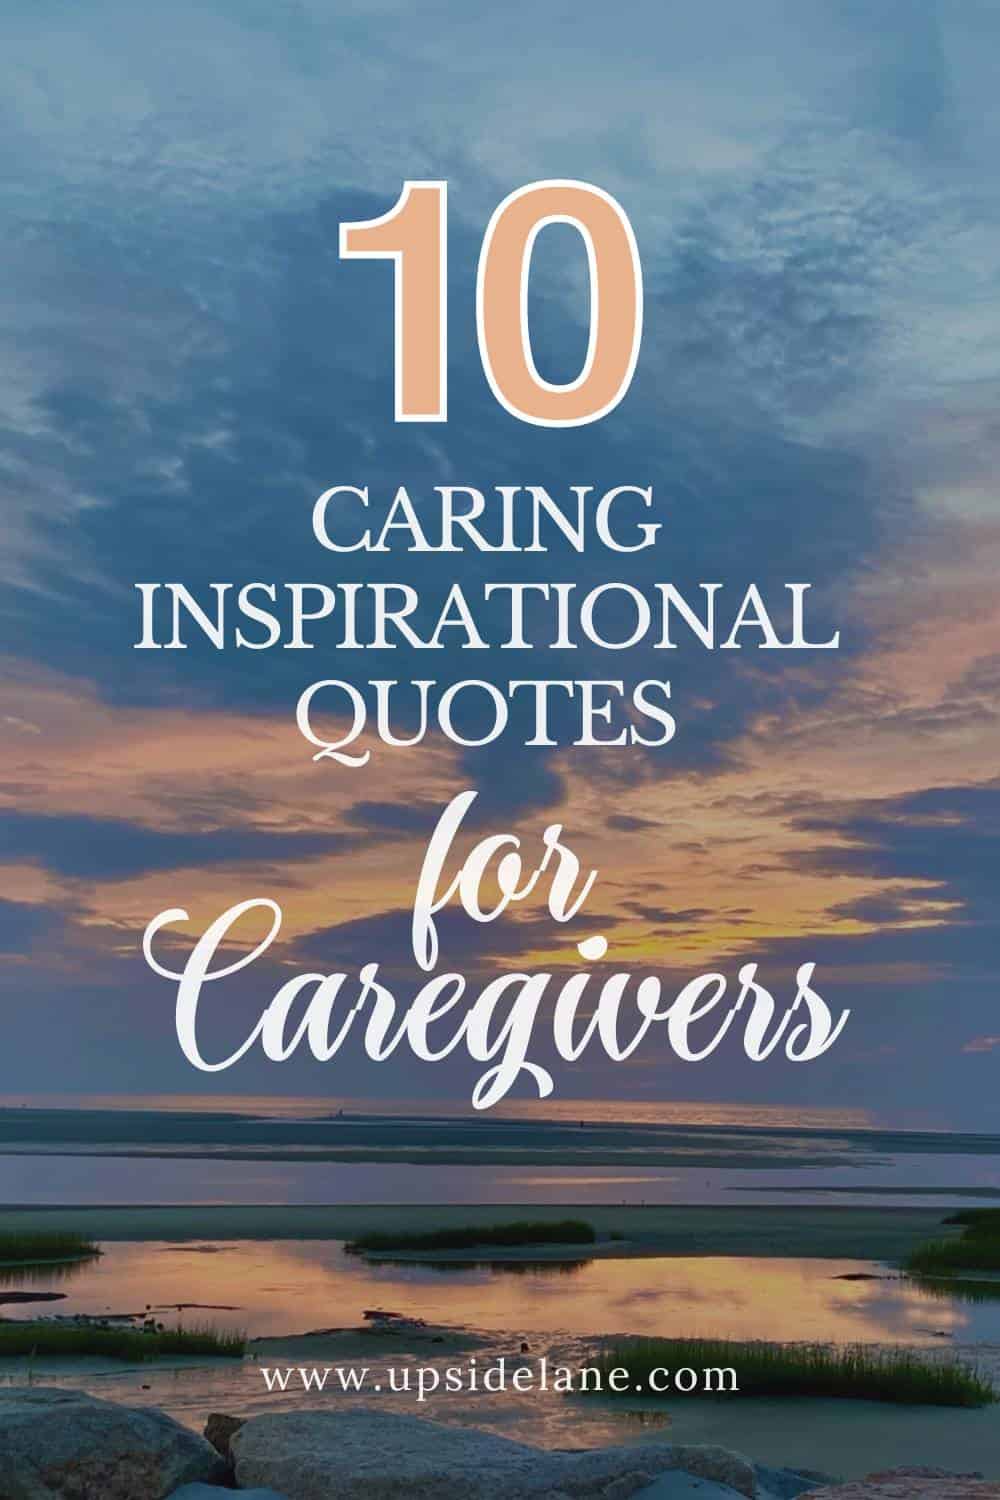 ten caring inspirational quotes for caregivers